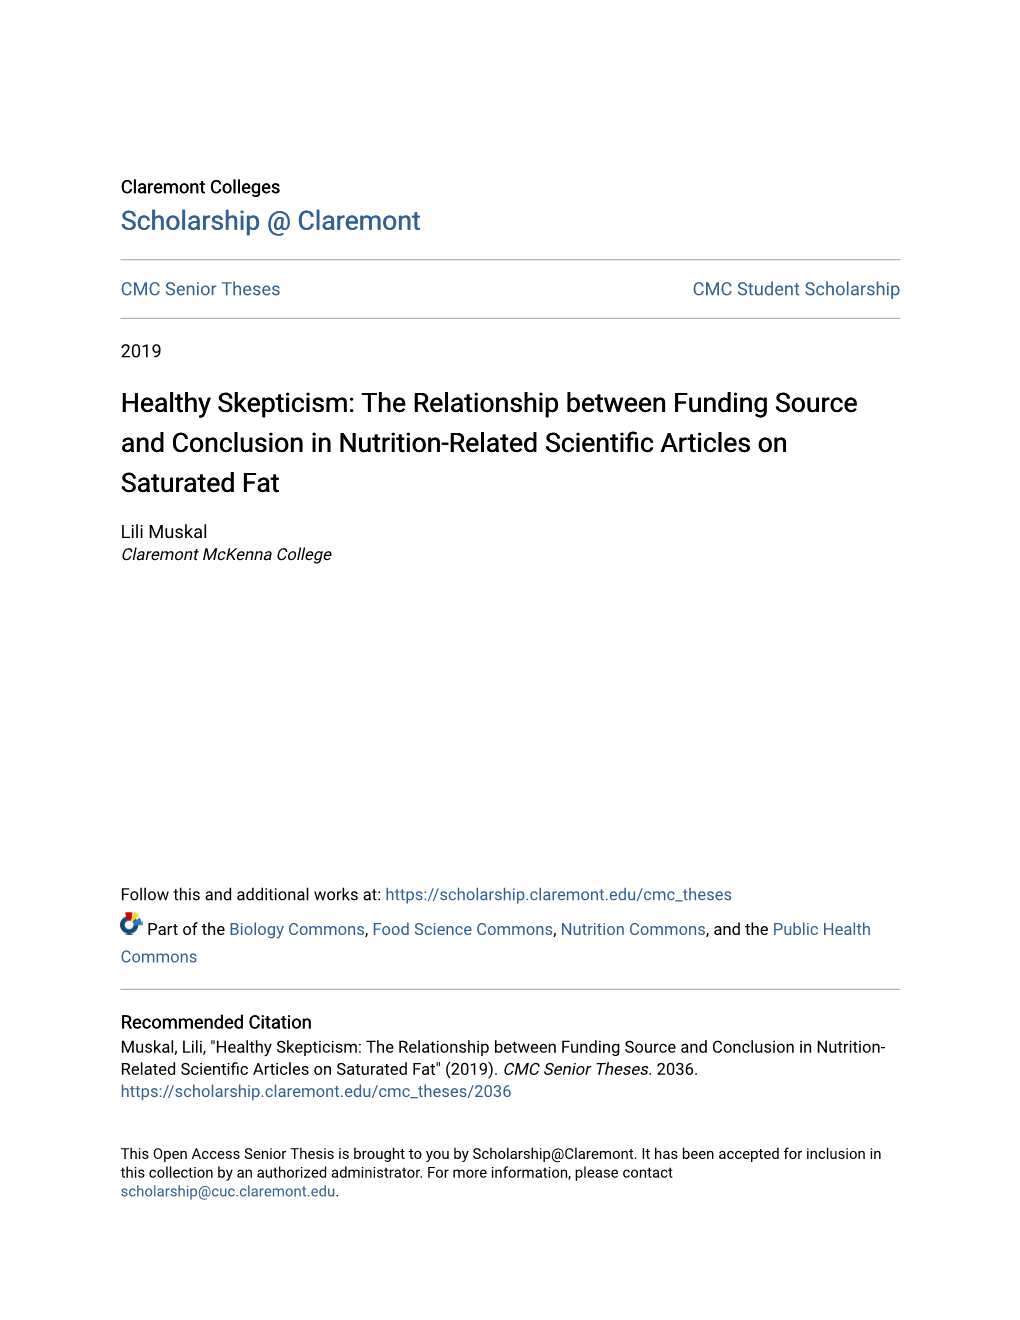 The Relationship Between Funding Source and Conclusion in Nutrition-Related Scientific Articles on Saturated Fat